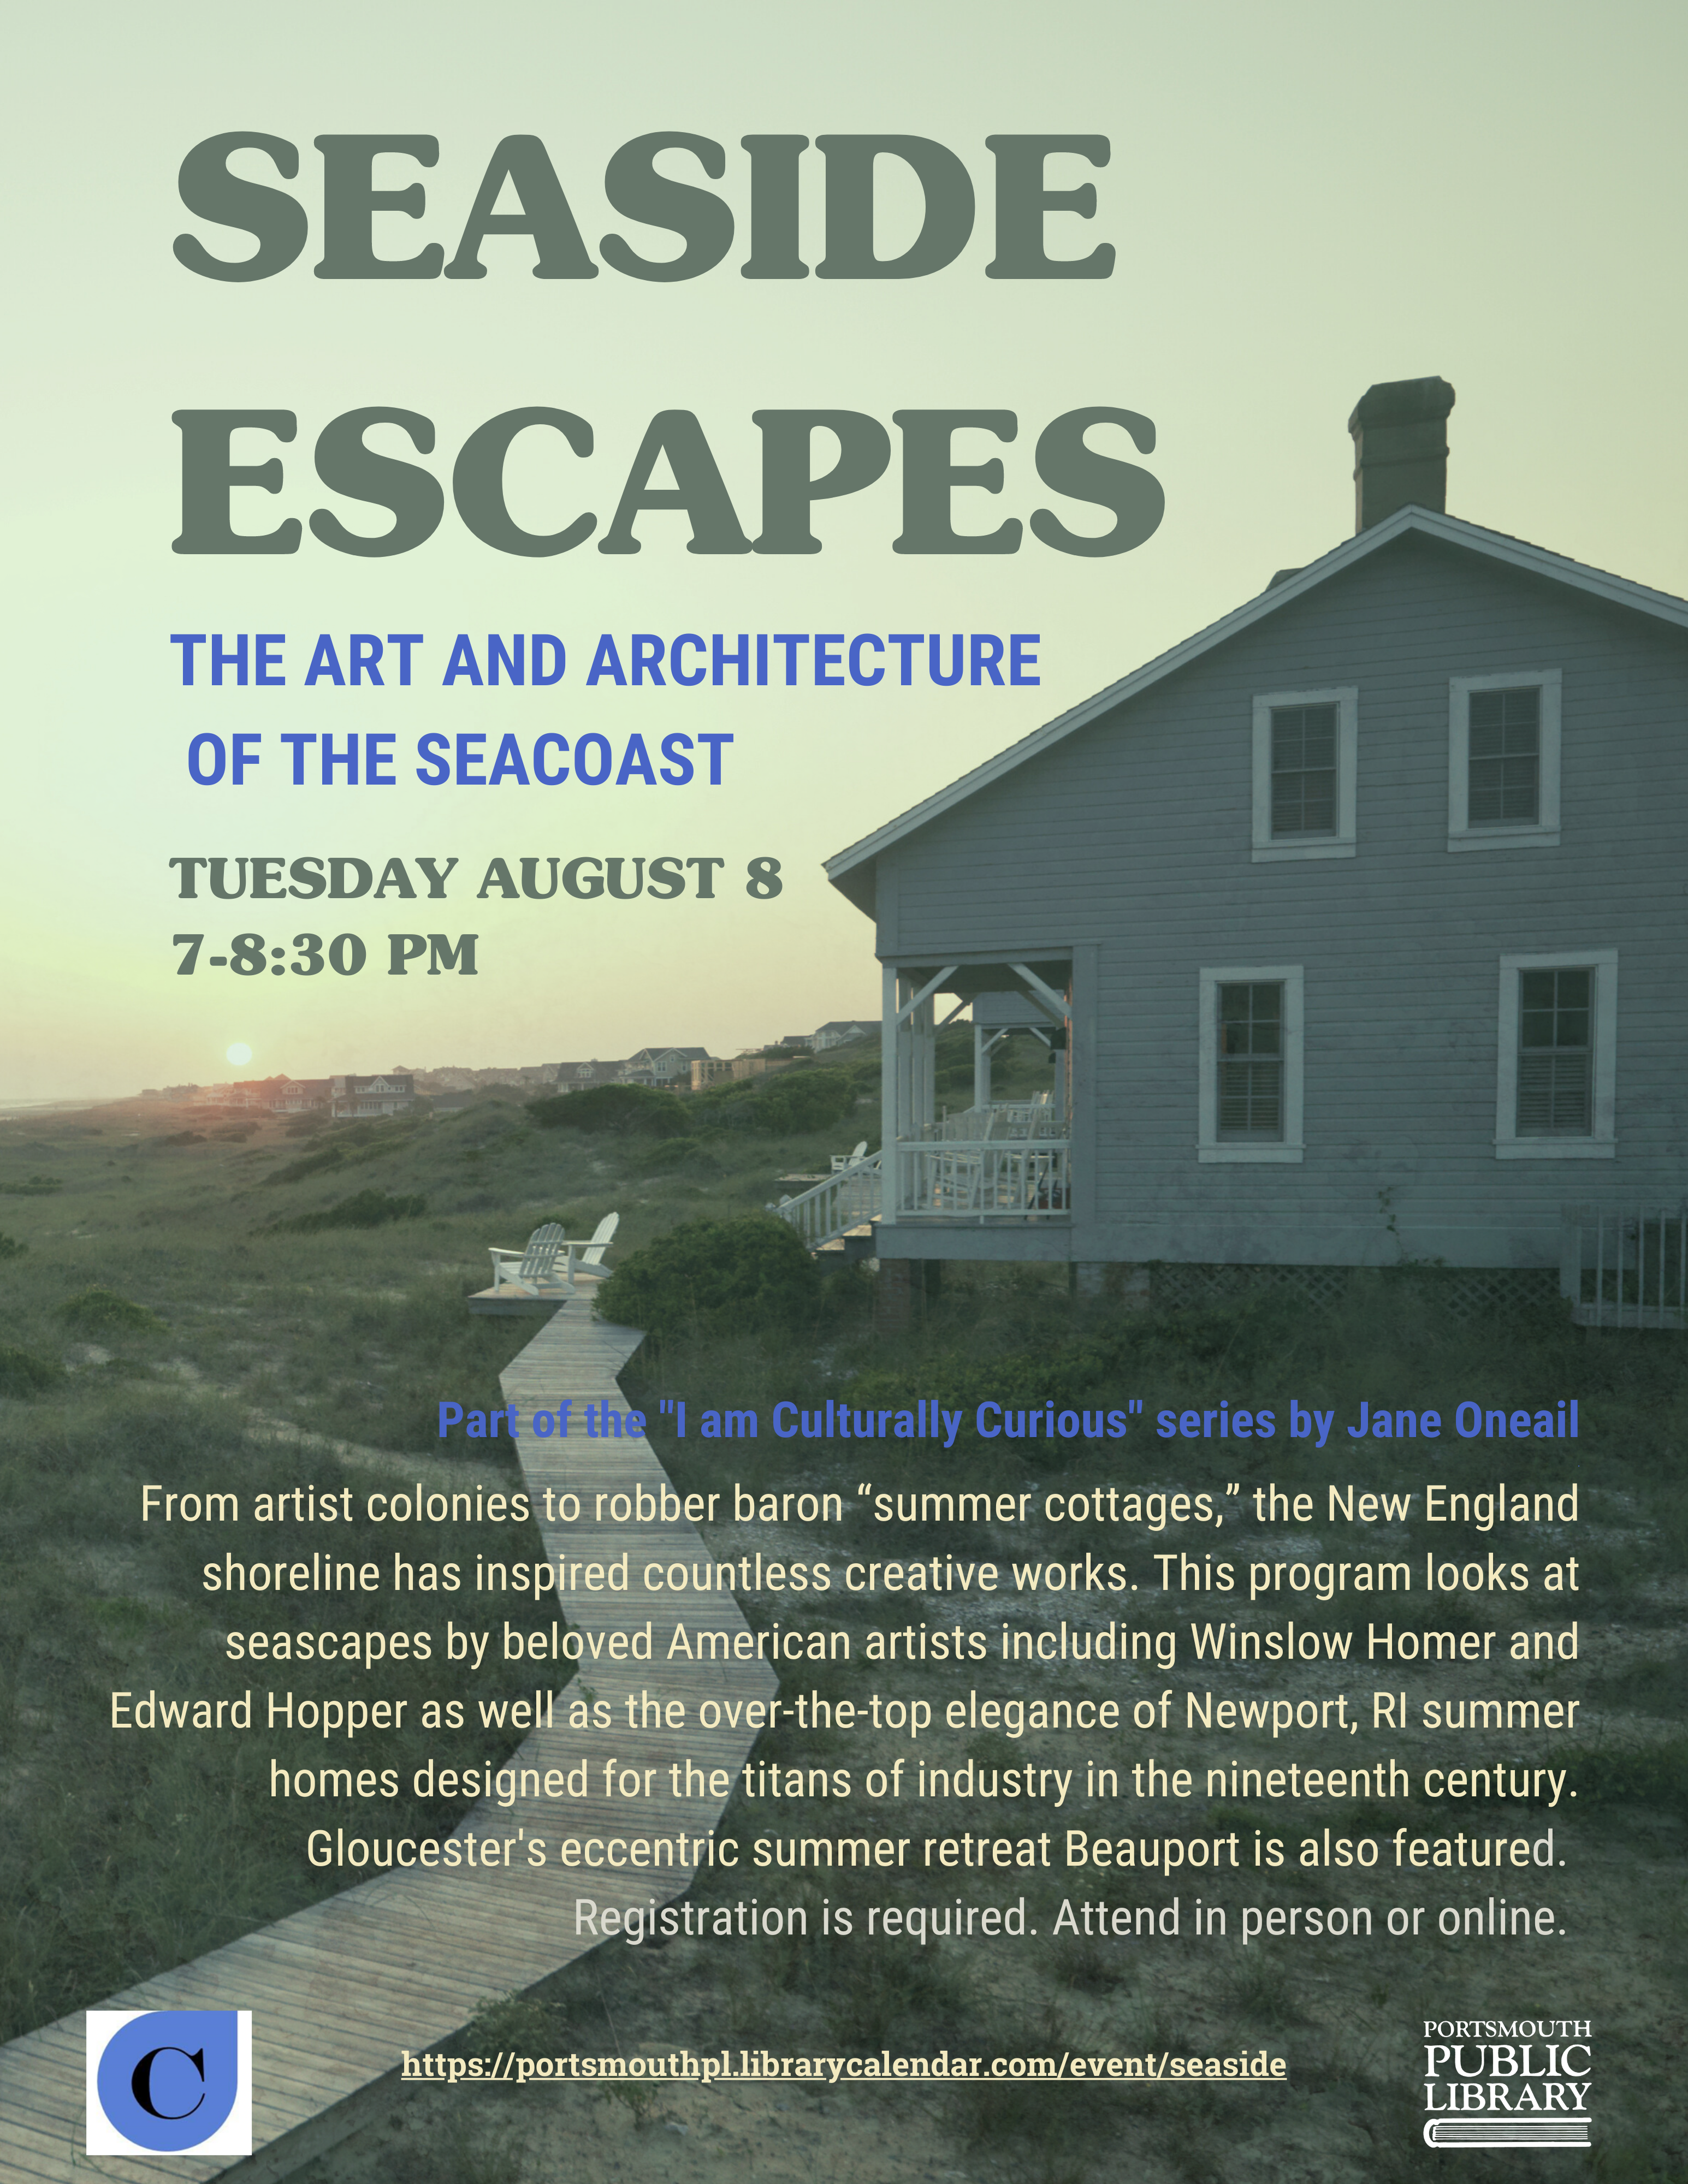 Seaside Escapes: The Art and Architecture of the Seacoast August 8 7-8:30 PM Image of seaside cottage and boardwalk leading to cottage. Portsmouth Public Library